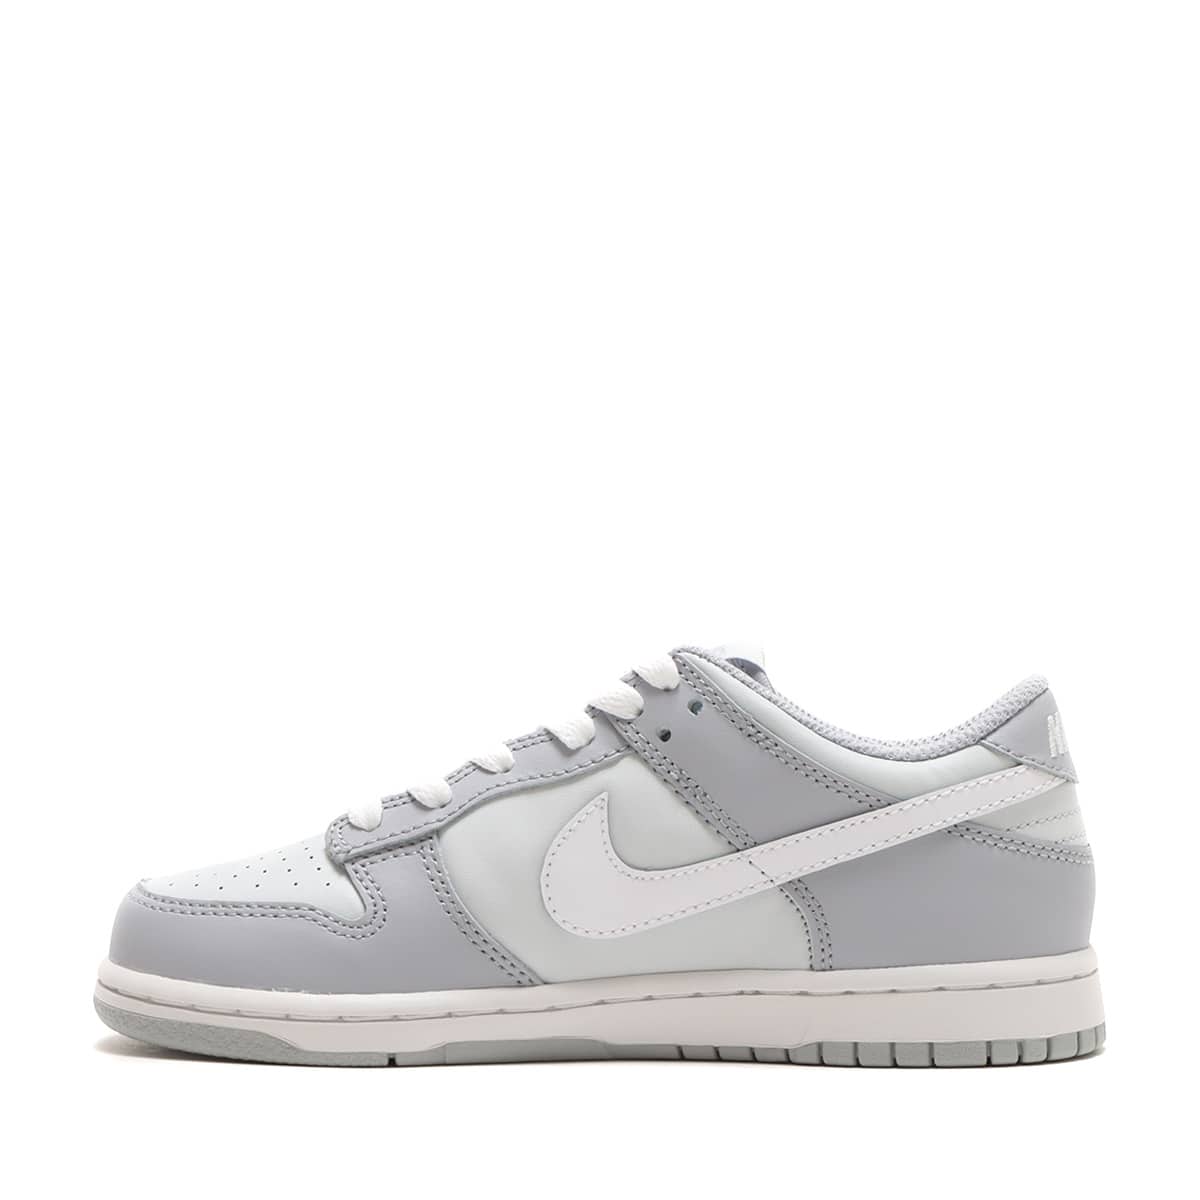 NIKE DUNK LOW PS PURE PLATINUM/WHITE-WOLF GREY 23SU-I